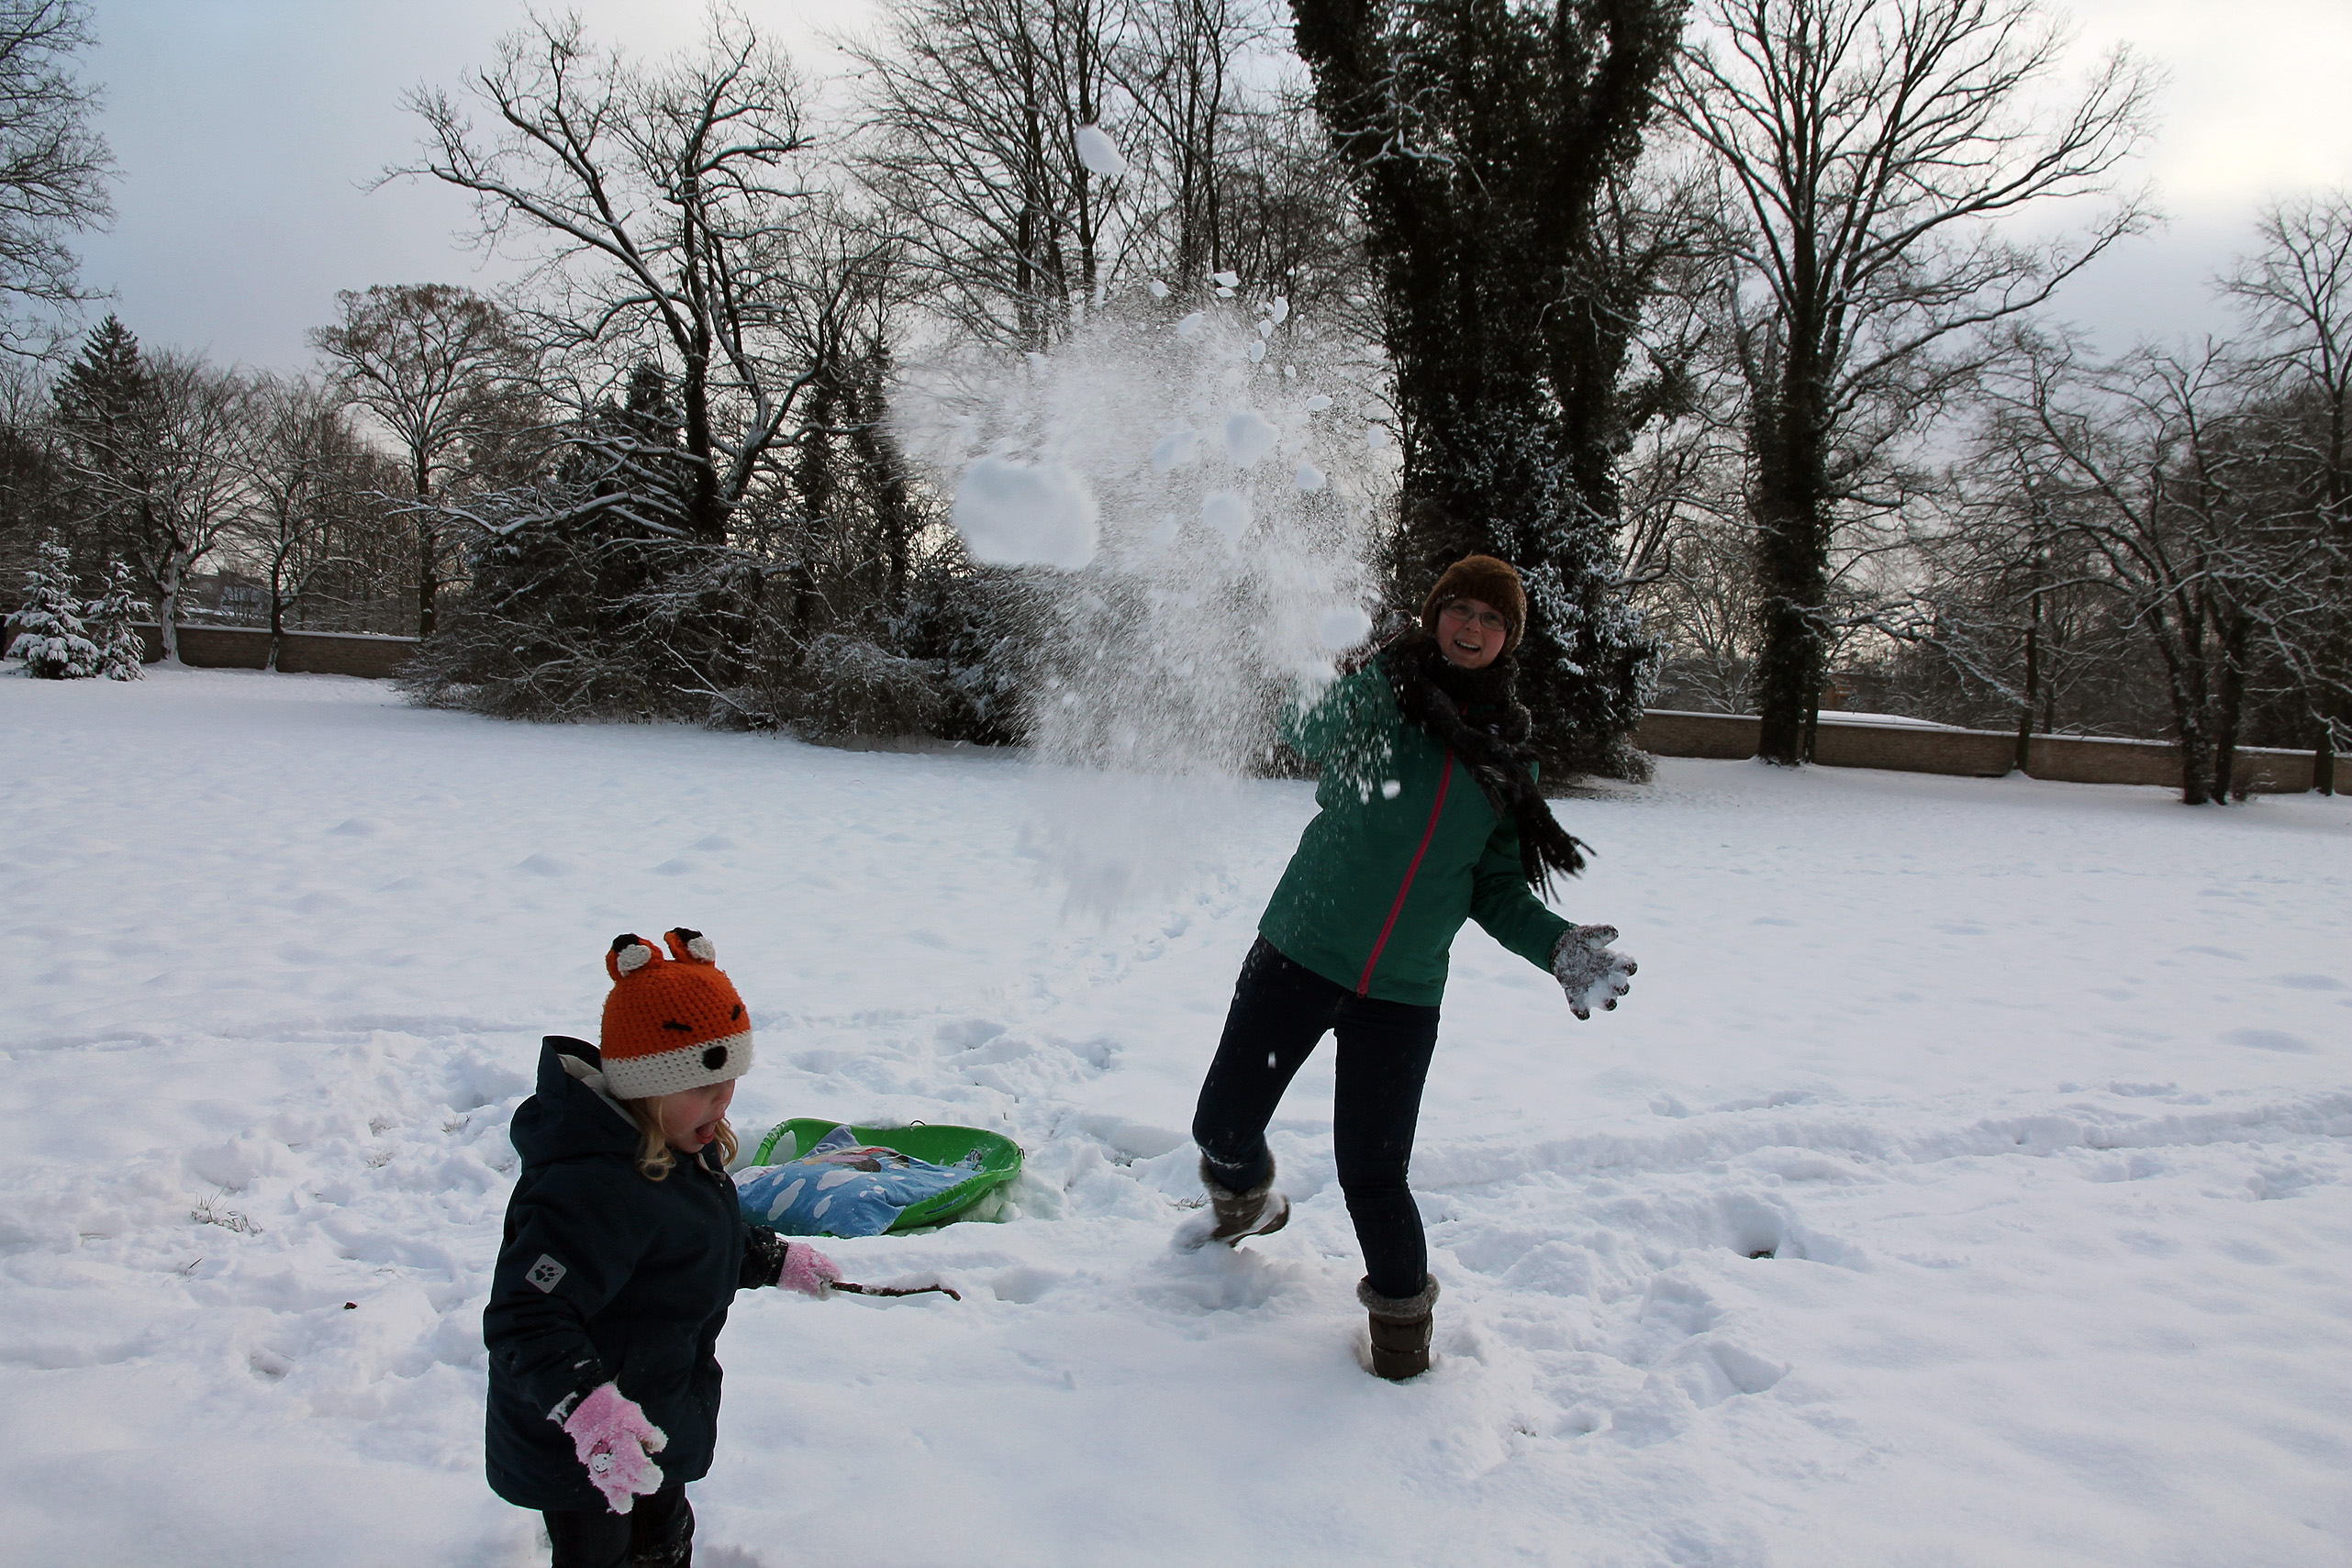 Some more fun in the snow...